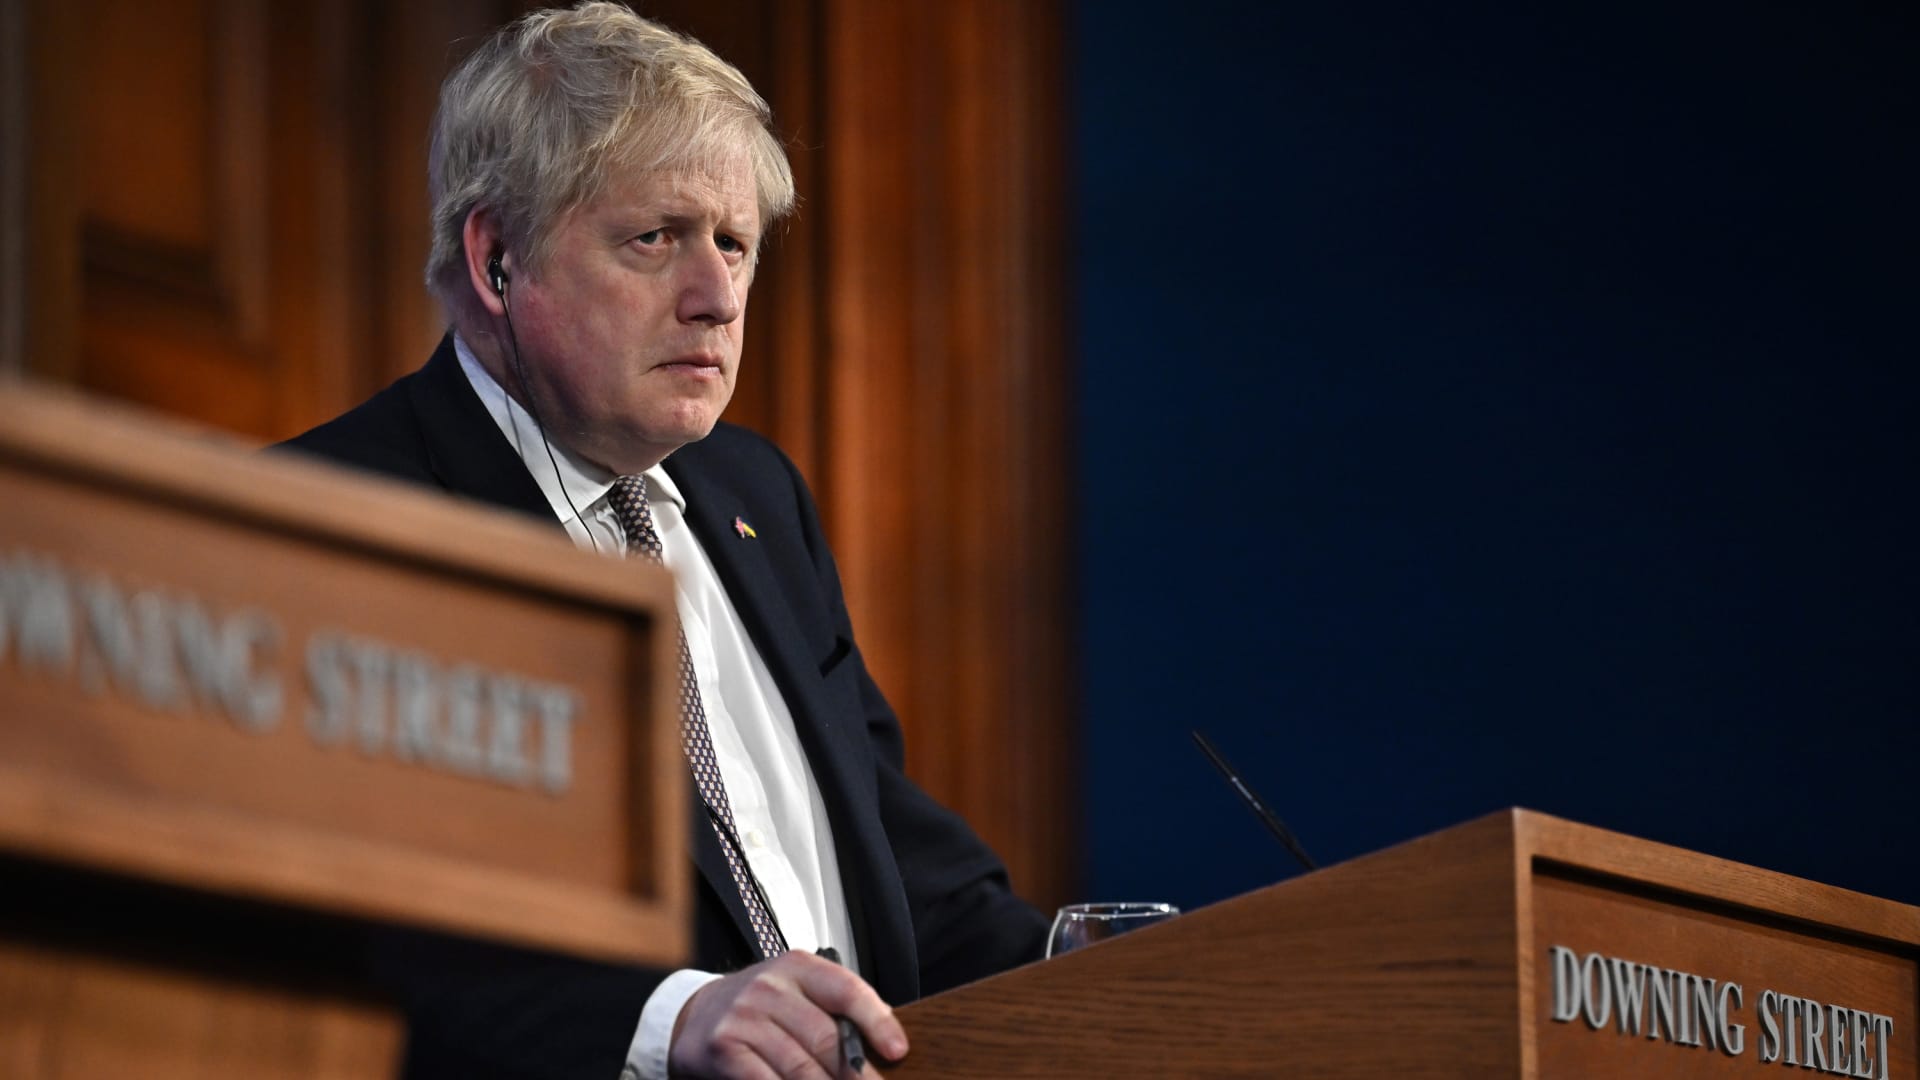 UK PM Boris Johnson faces leadership vote after 'partygate' scandal angers his own lawmakers